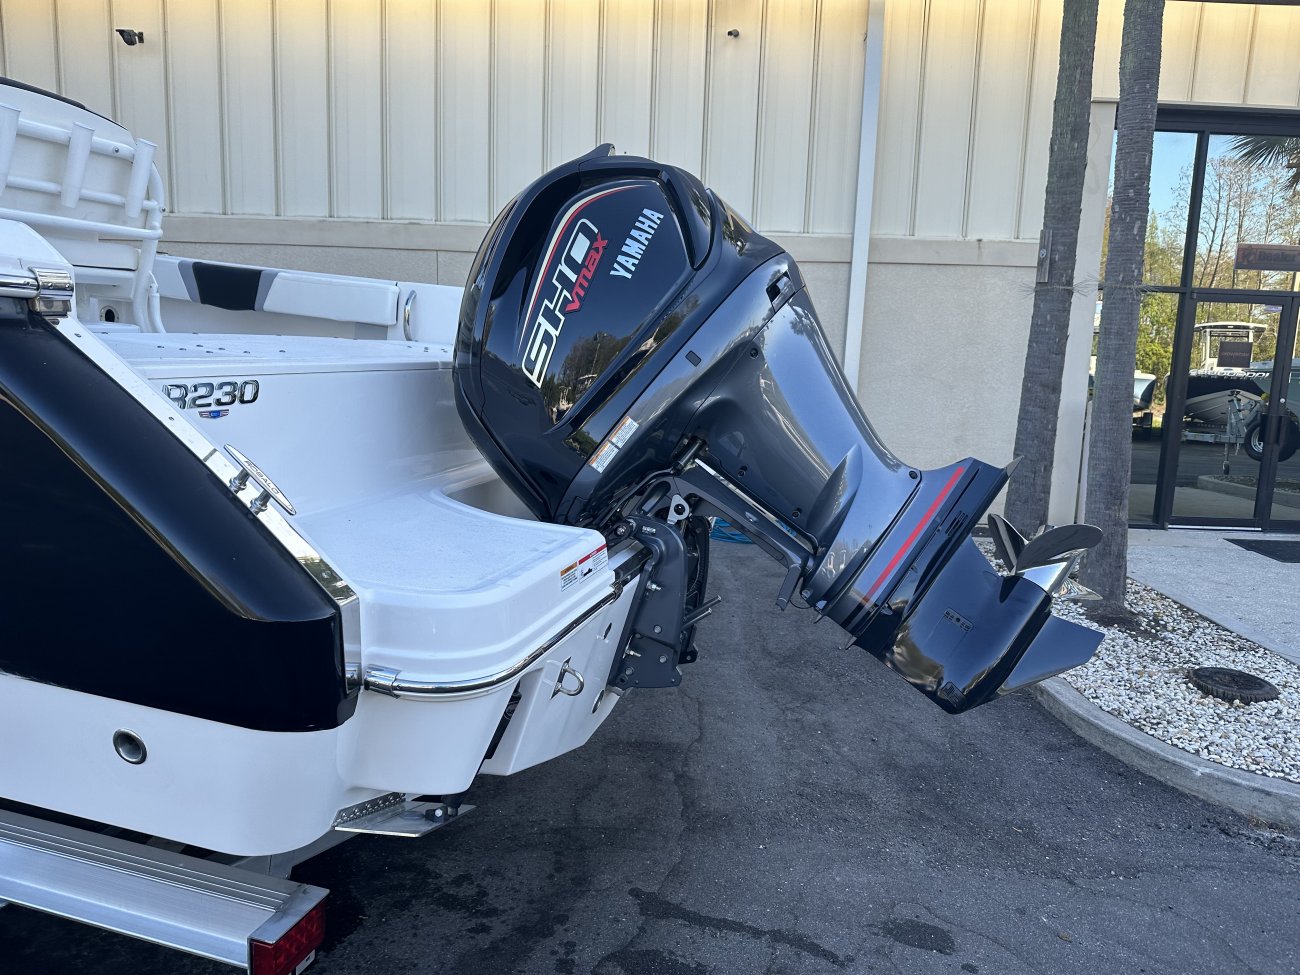 A R230 Center Console is a Power and could be classed as a Center Console, Fish and Ski, Freshwater Fishing, Saltwater Fishing, Ski Boat, Wakeboard Boat, Sport Fisherman,  or, just an overall Great Boat!